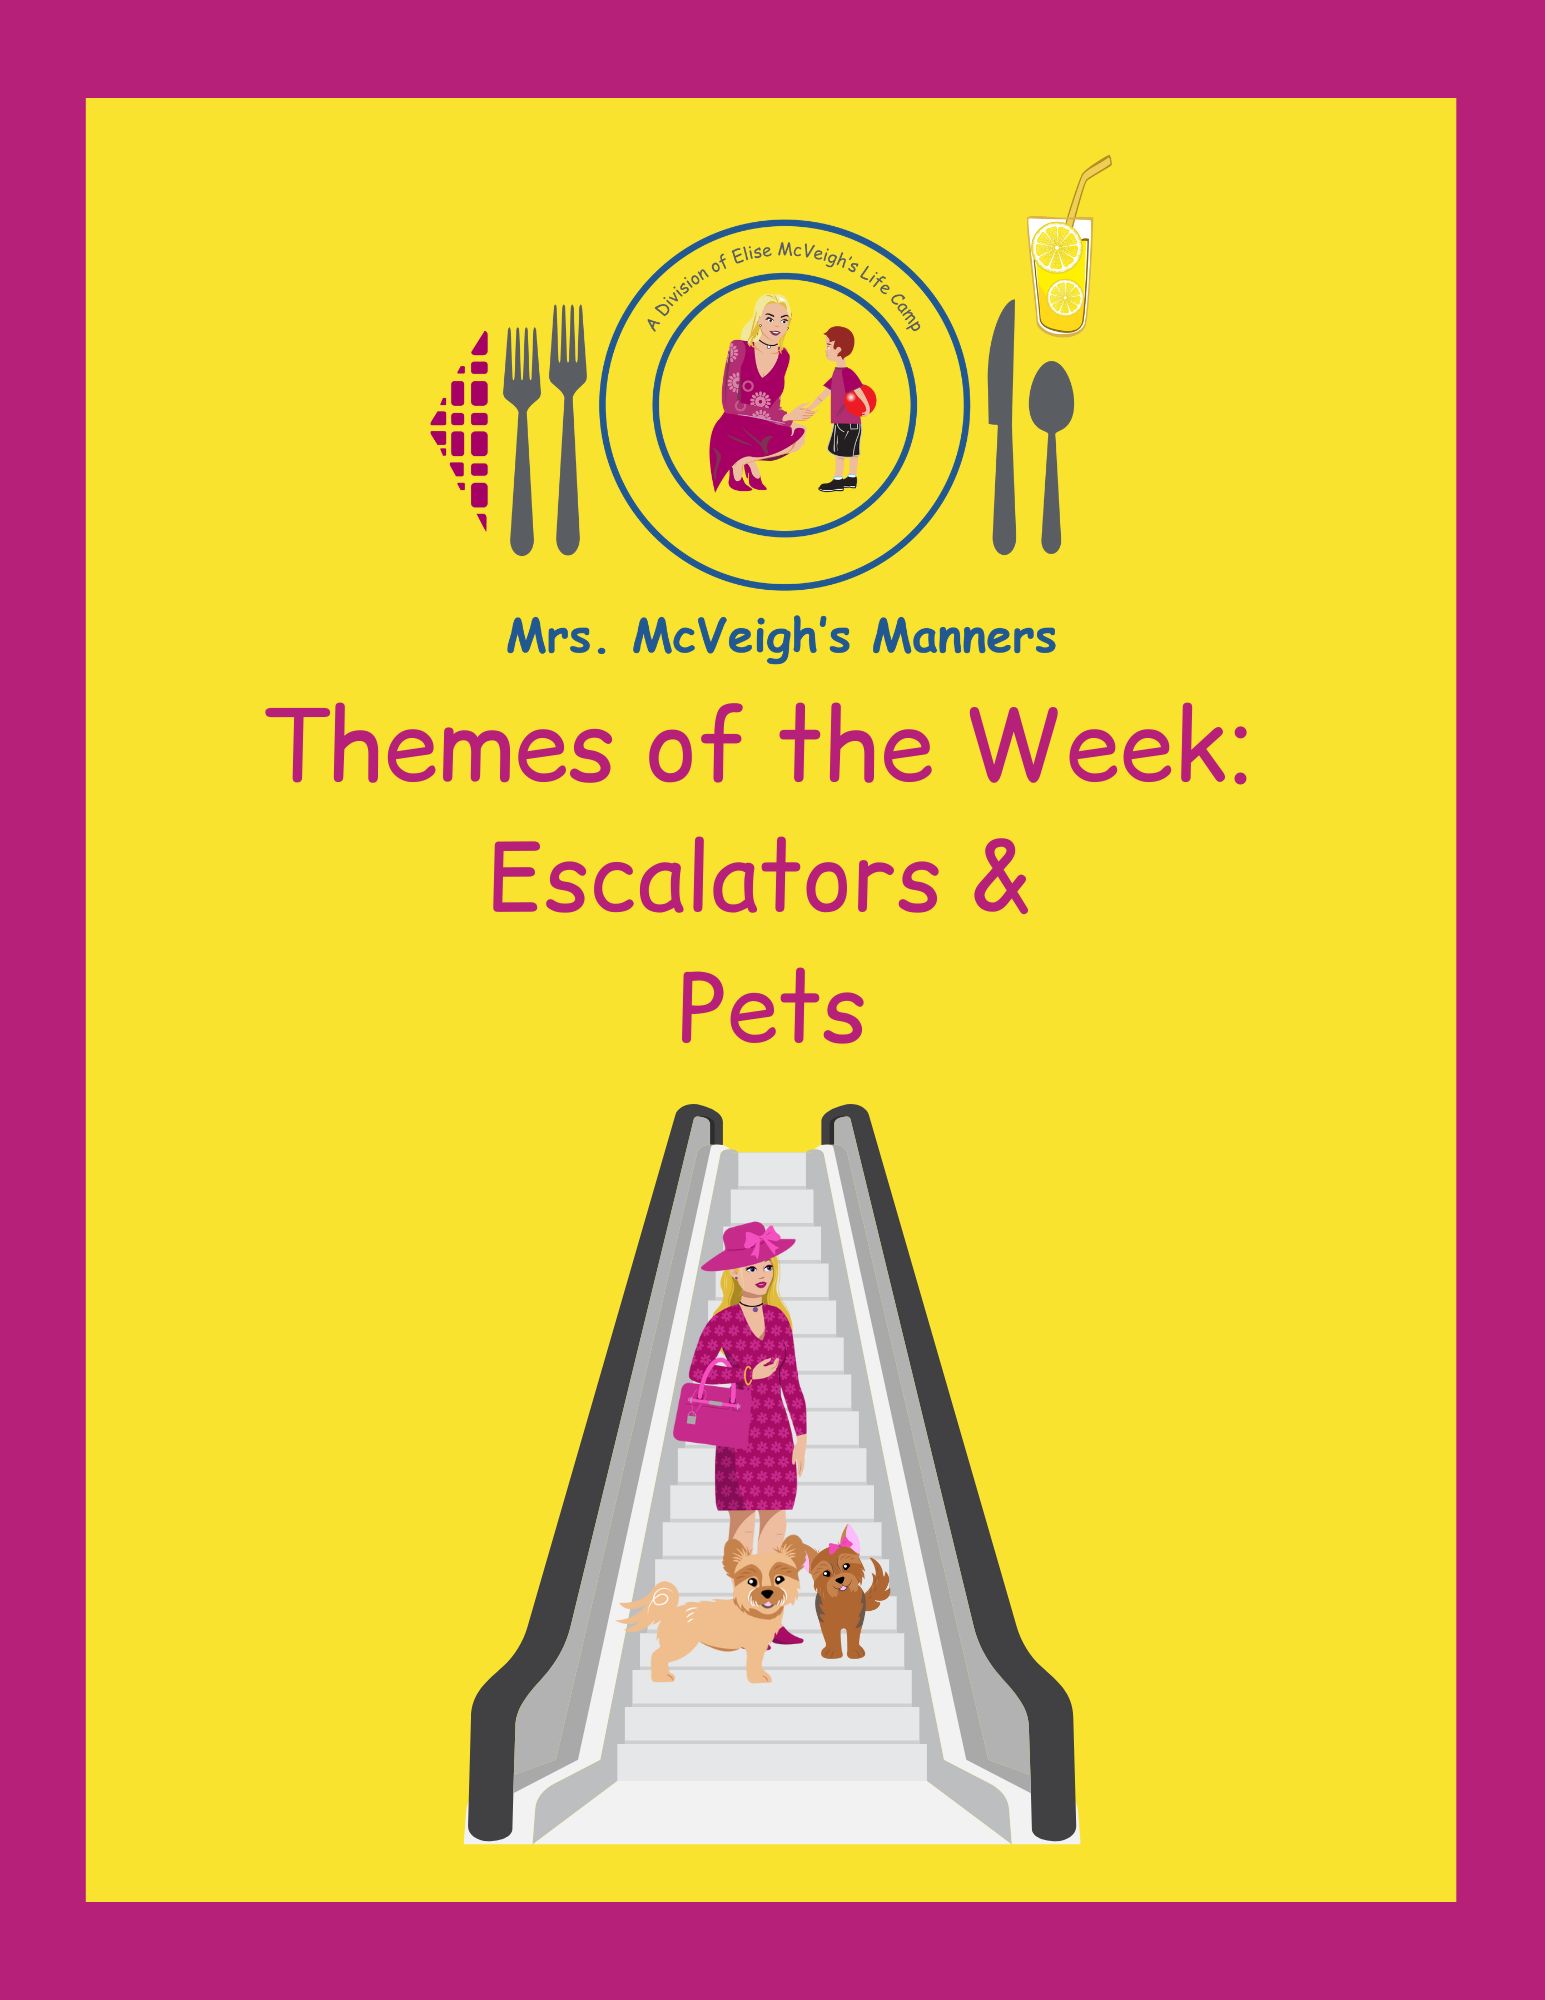 Escalators and Pets – Themes of the Week